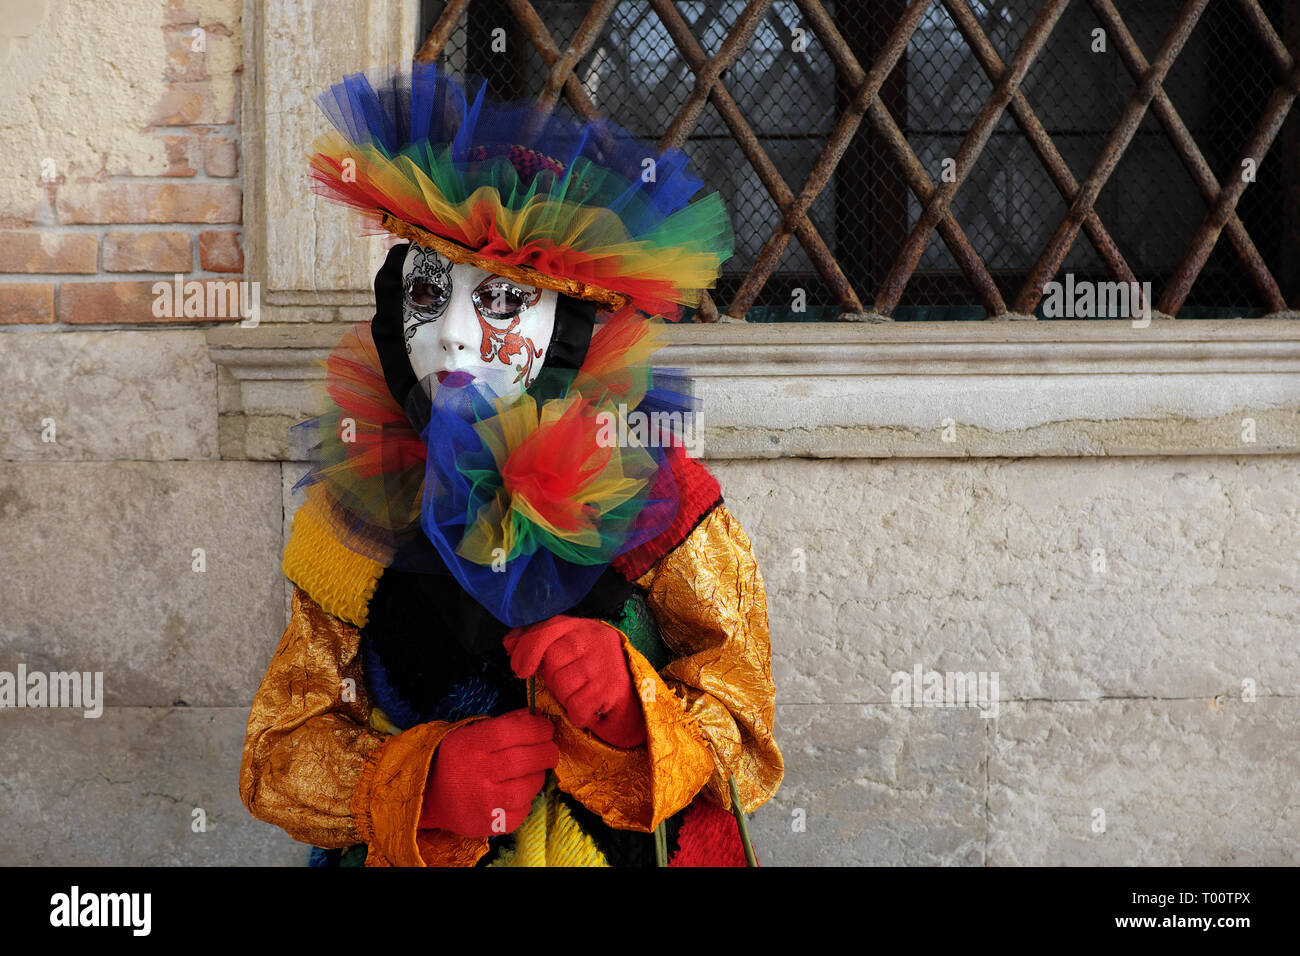 Woman dressed in traditional mask and costume for Venice Carnival standing at Doge’s Palace, Piazza San Marco, Venice, Veneto, Italy Stock Photo